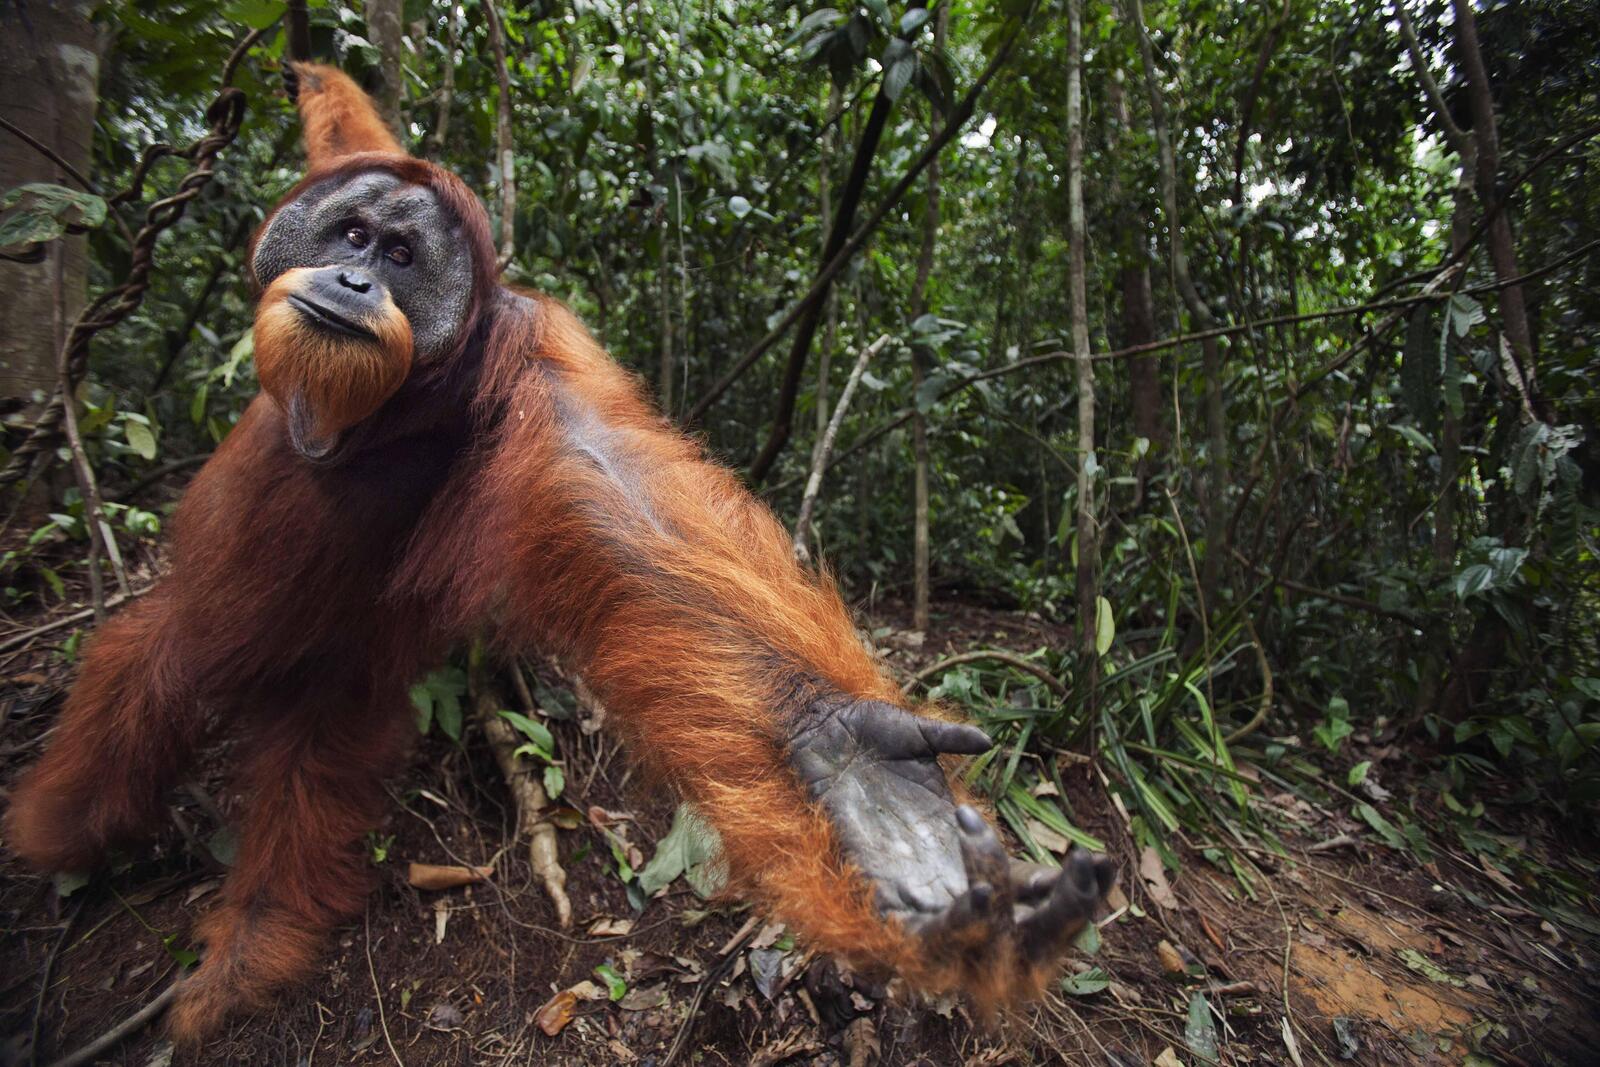 Orangutan swings from a vine and holds out palm 